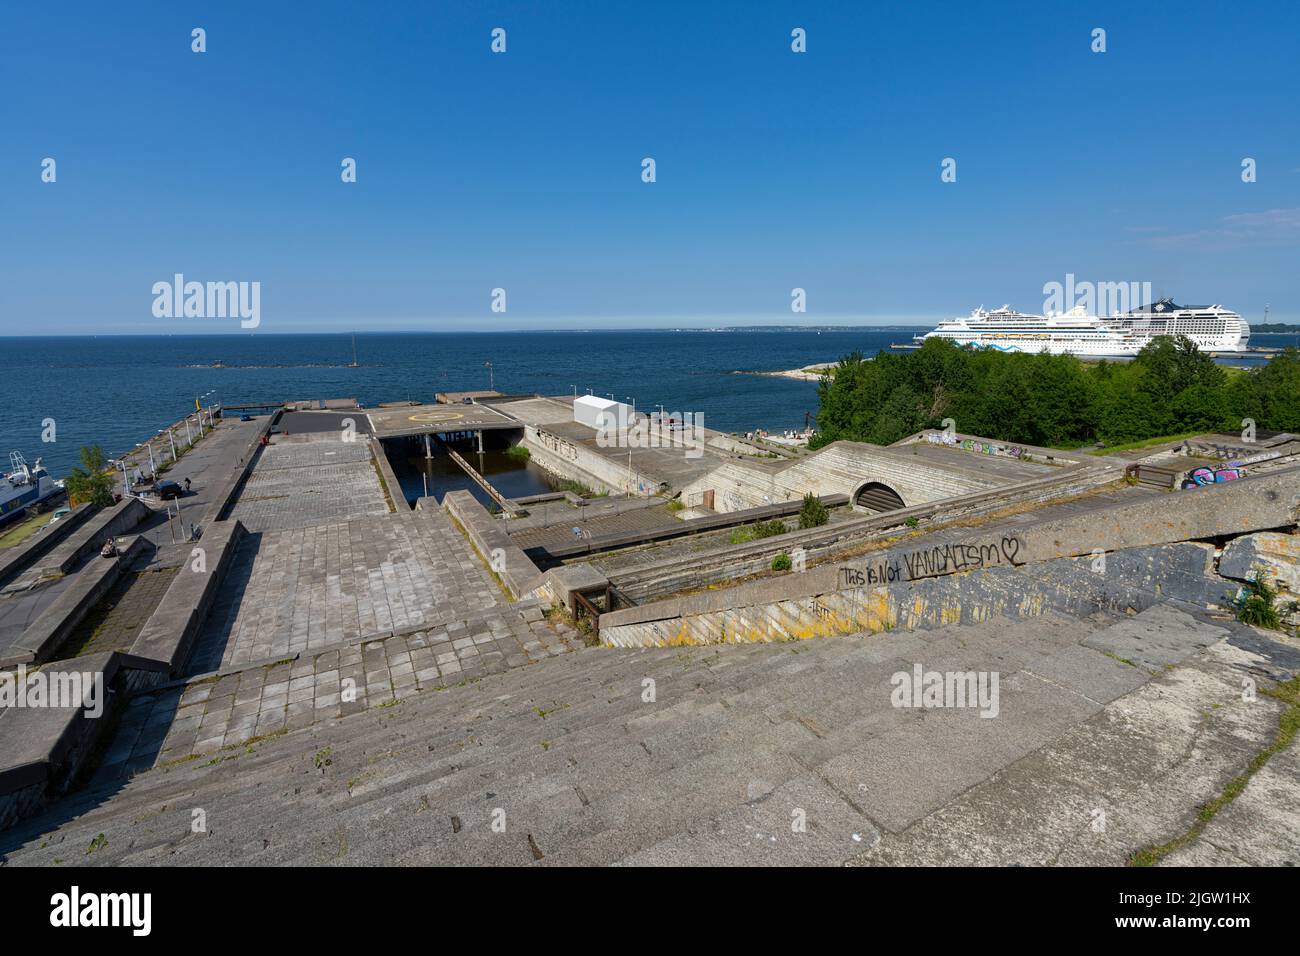 Tallinn, Estonia. July 2022.  View of Linnahall, a Soviet-era architectural structure built for the XXII Moscow Olympics which at the time was called Stock Photo